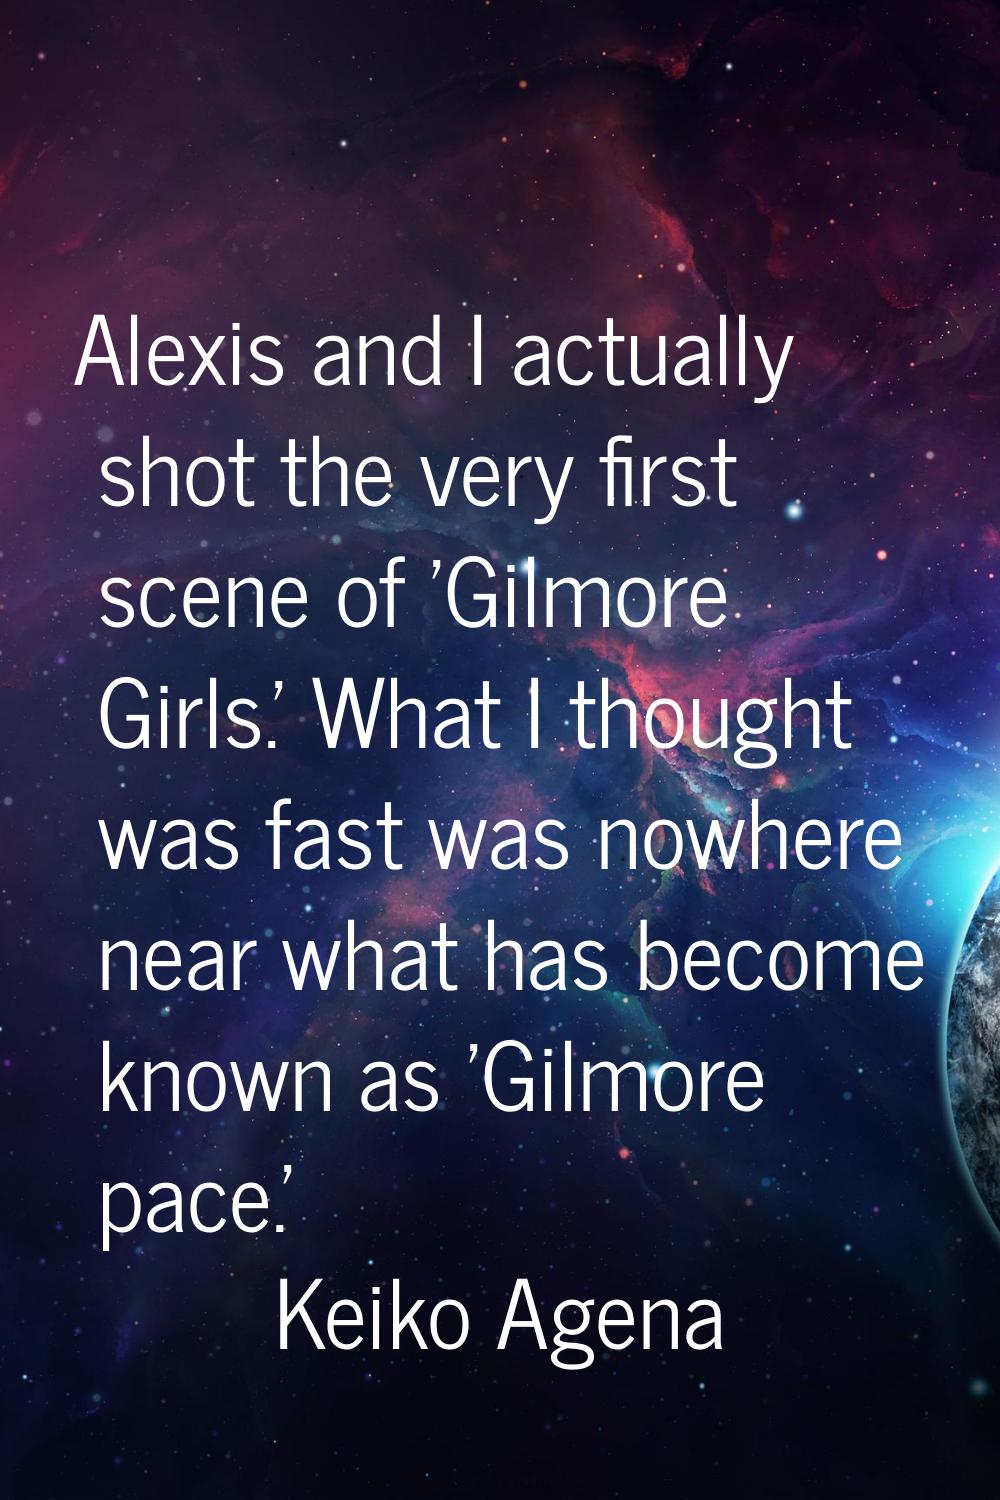 Alexis and I actually shot the very first scene of 'Gilmore Girls.' What I thought was fast was now